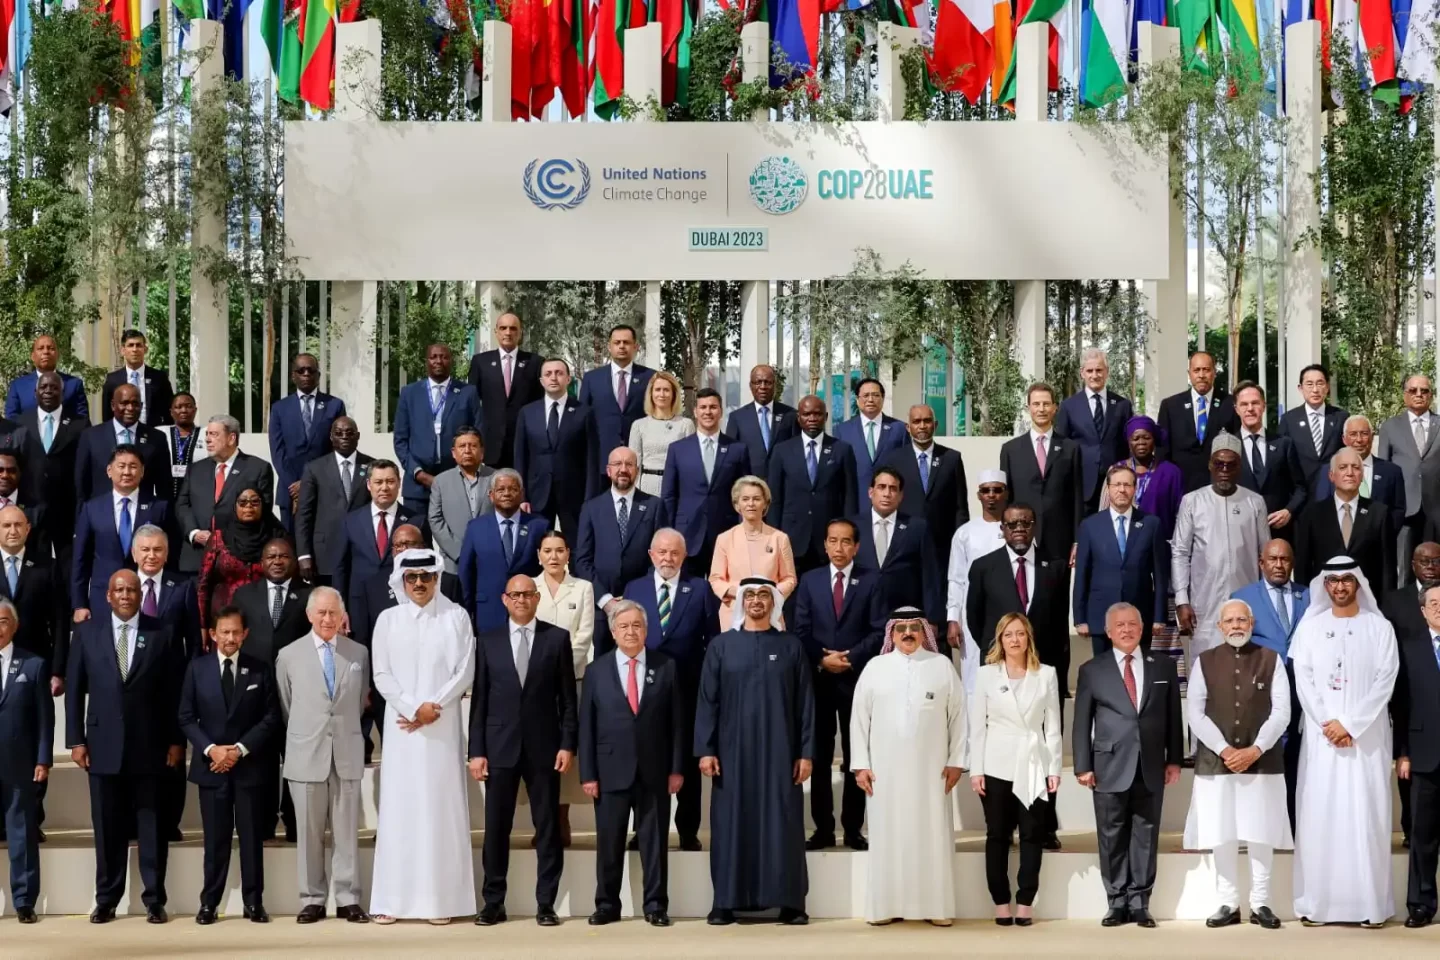 world leaders pose together for a photo at cop28 convention in uae